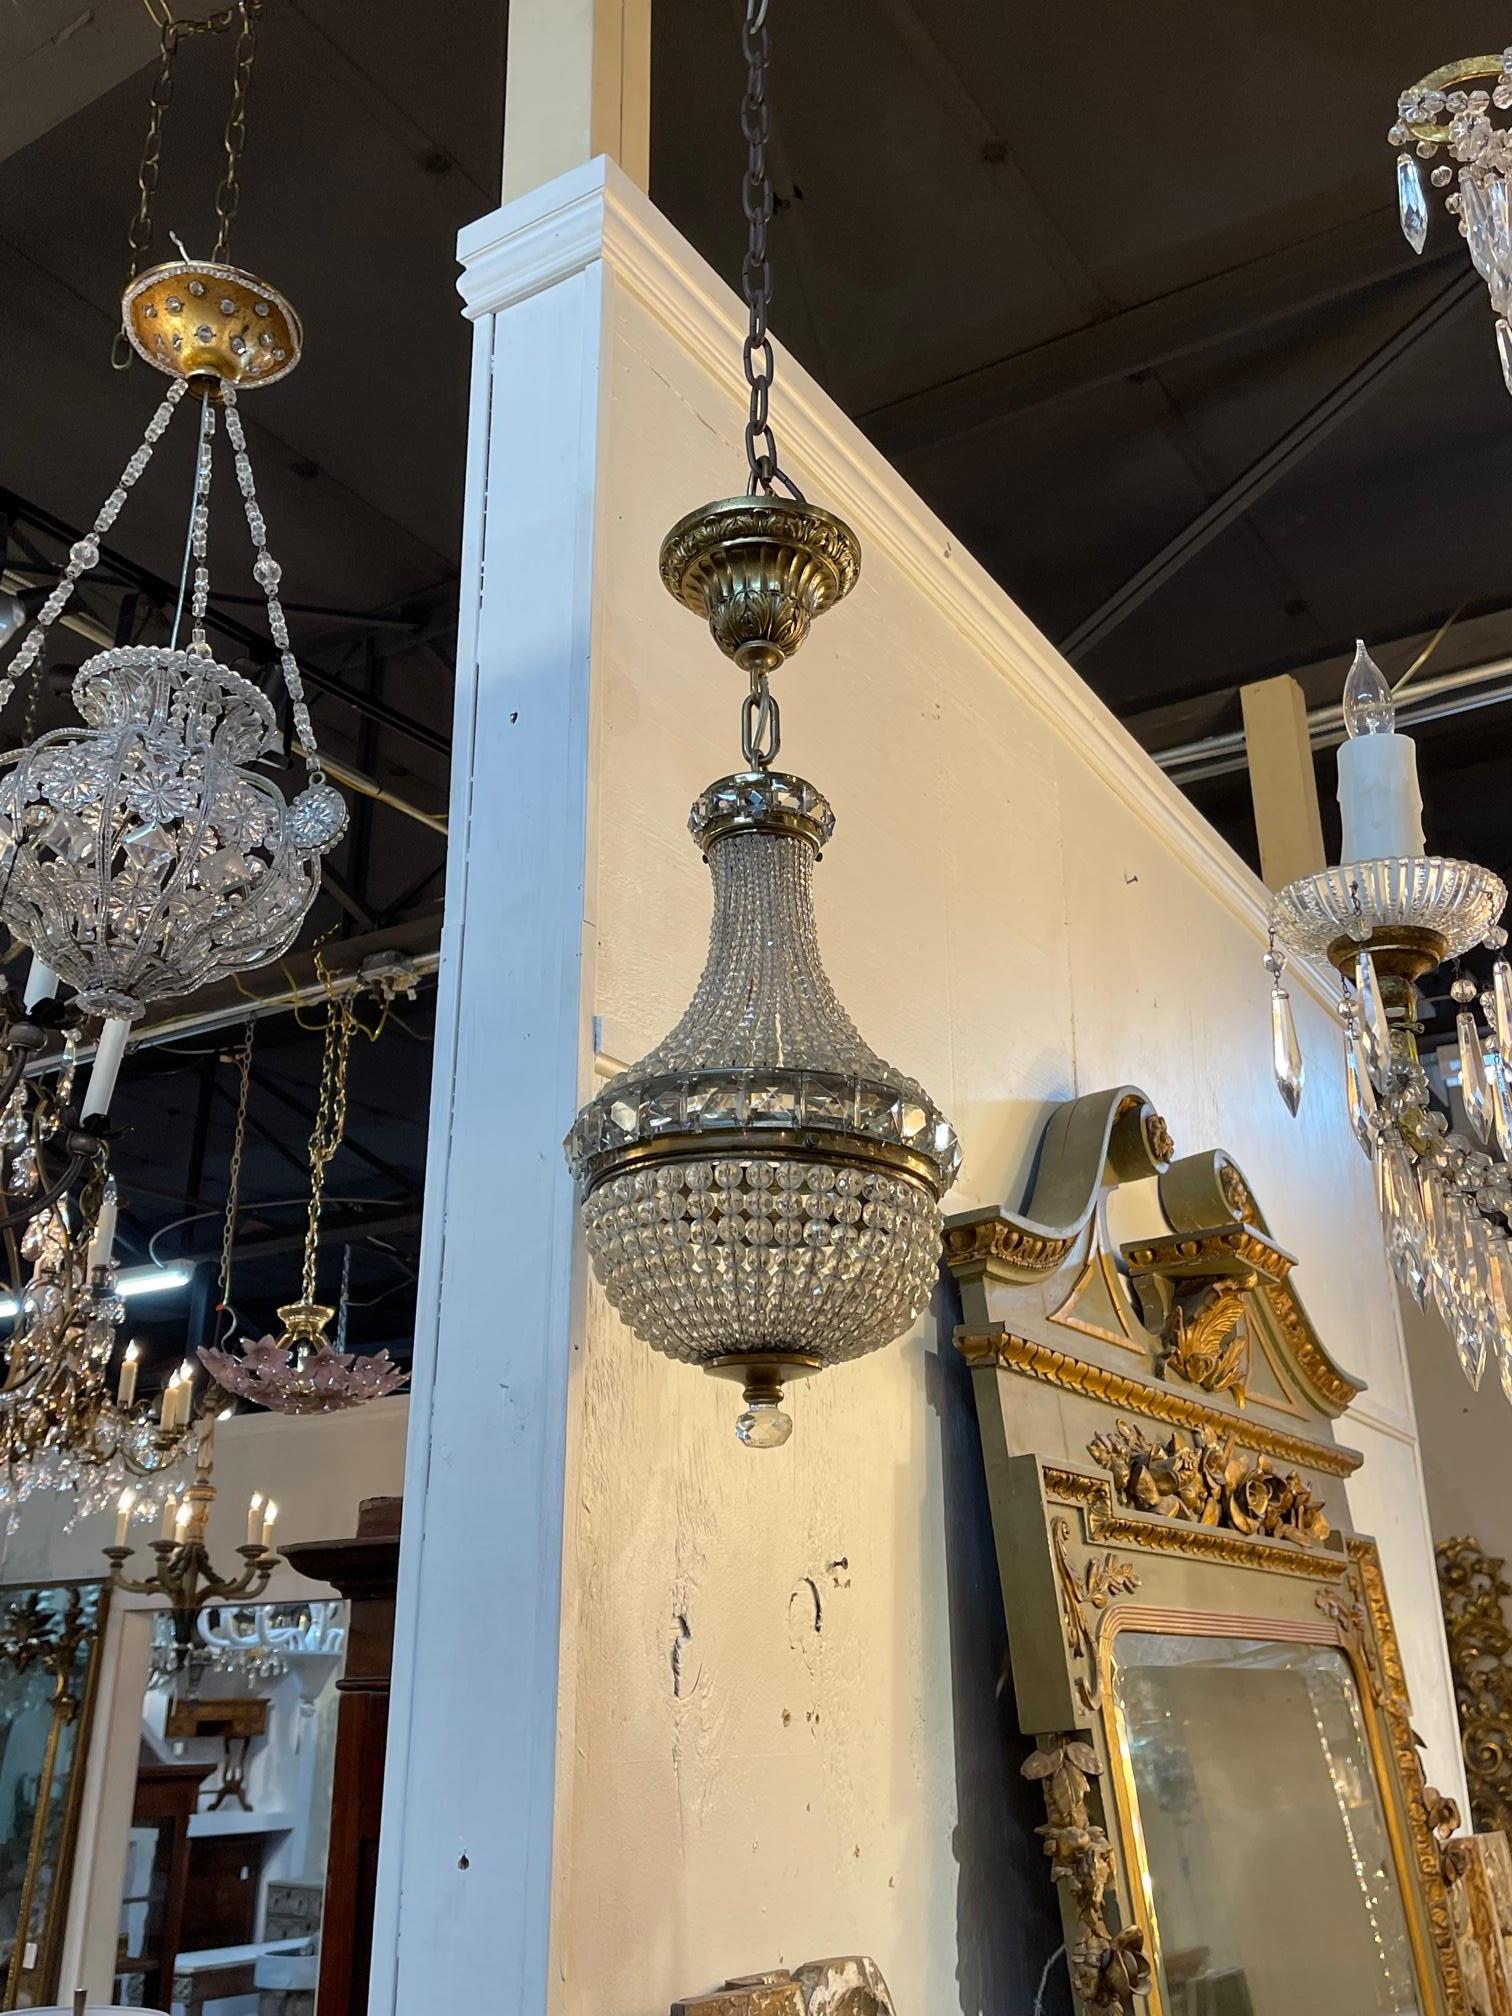 Vintage Italian beaded crystal pendant light, circa 1960. The chandelier has been professionally re-wired, cleaned and is ready to hang. Includes matching chain and canopy.